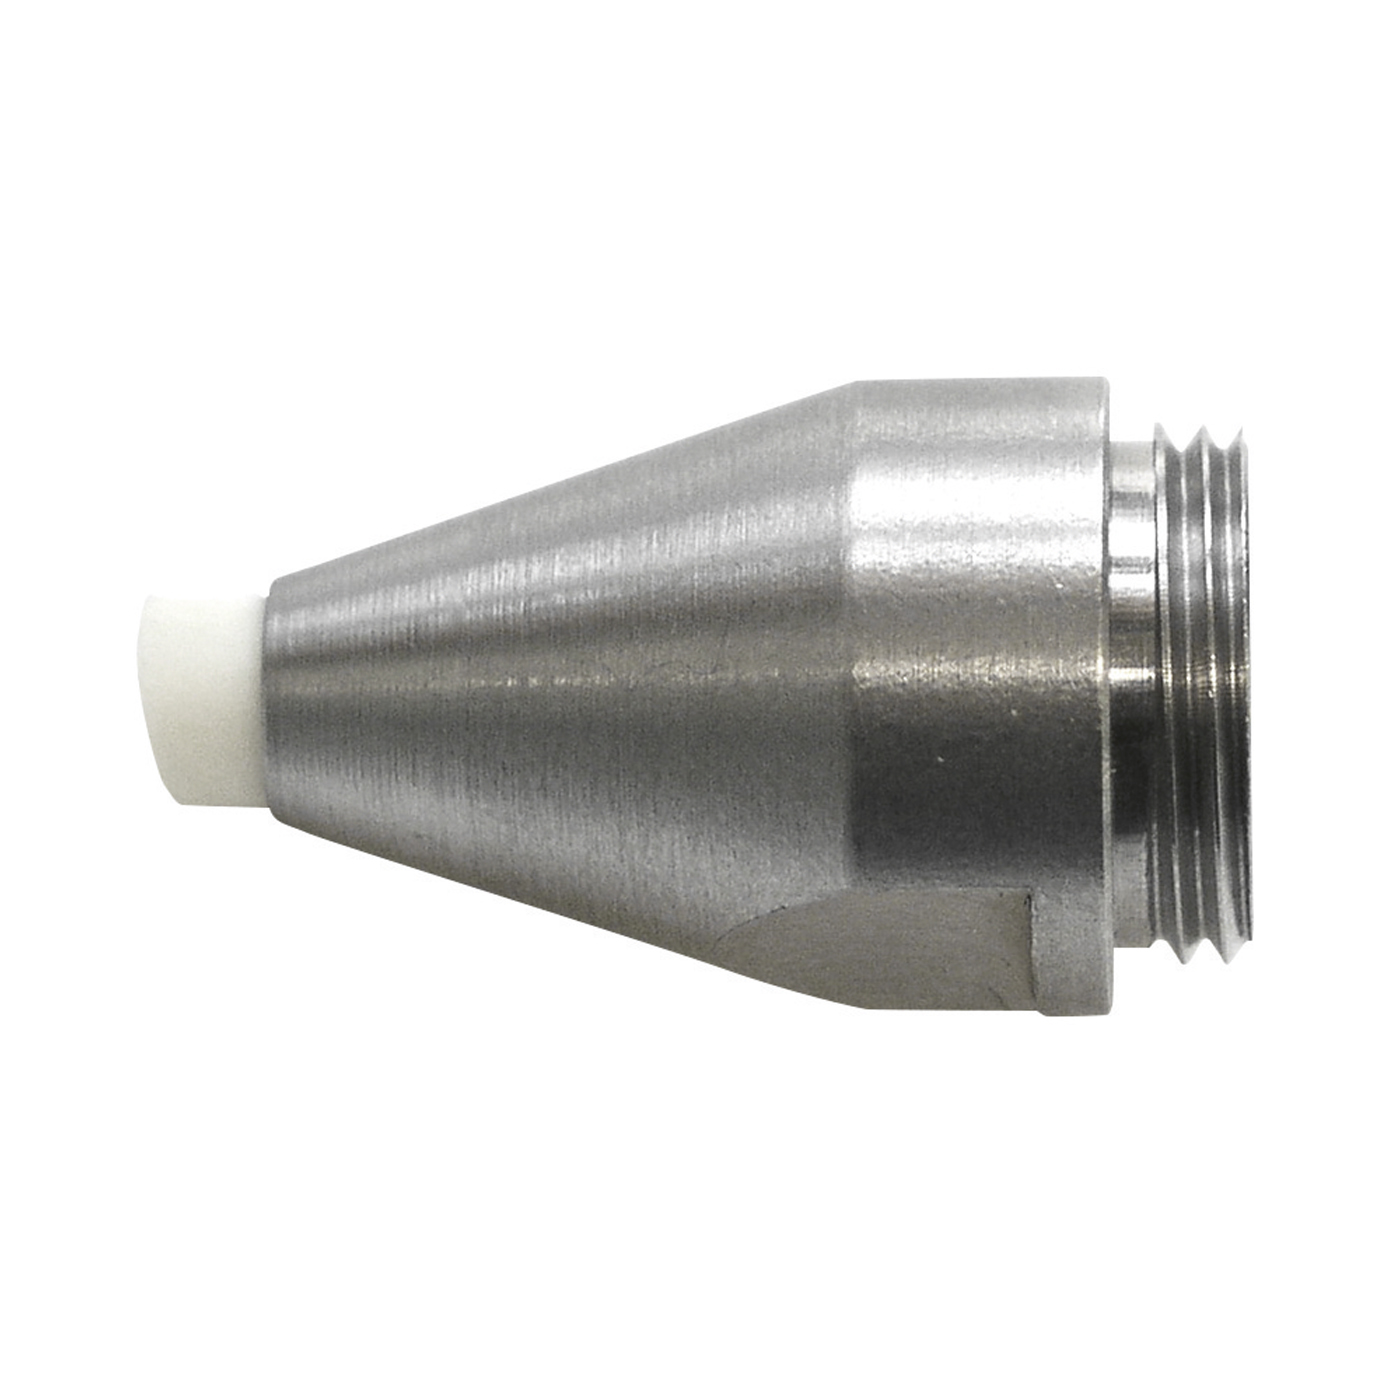 Argon Nozzle, with Screw Connection, for Puk - 1 piece